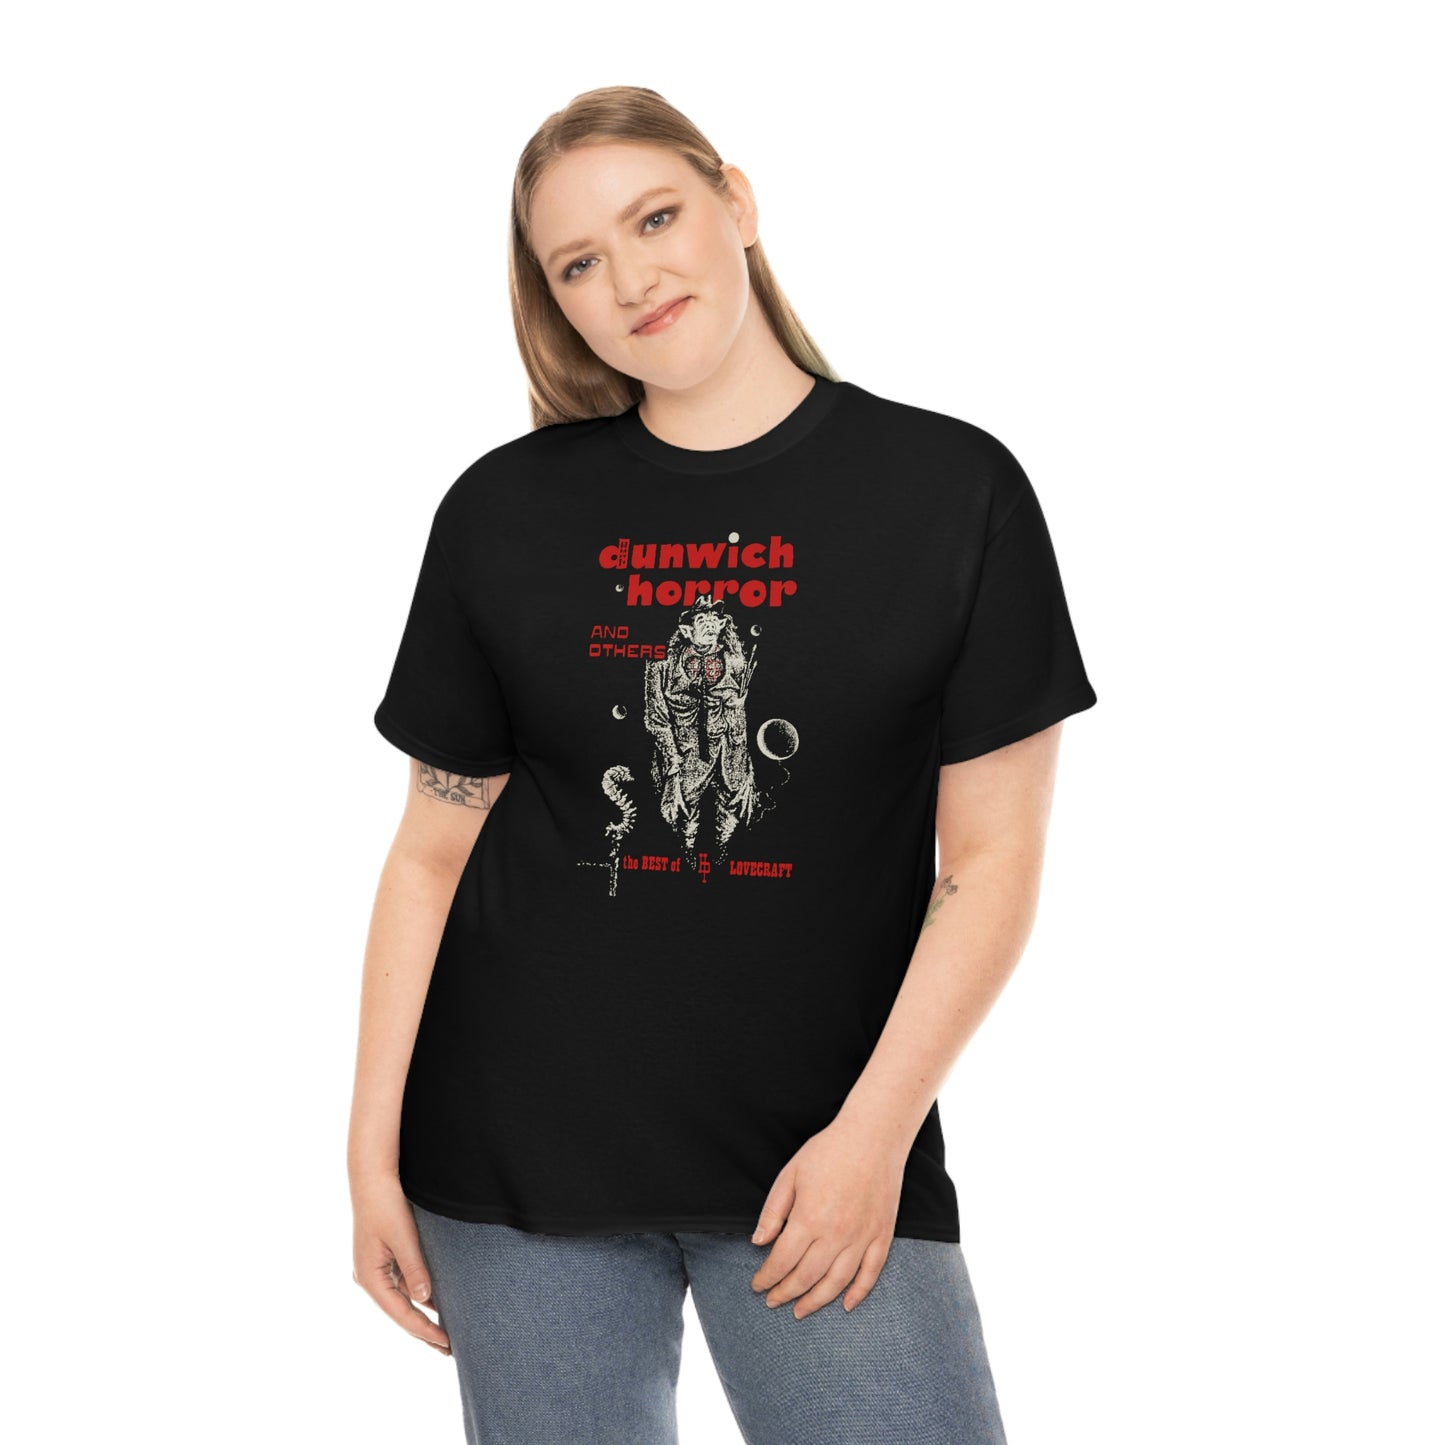 The Dunwich Horror and Others T-Shirt